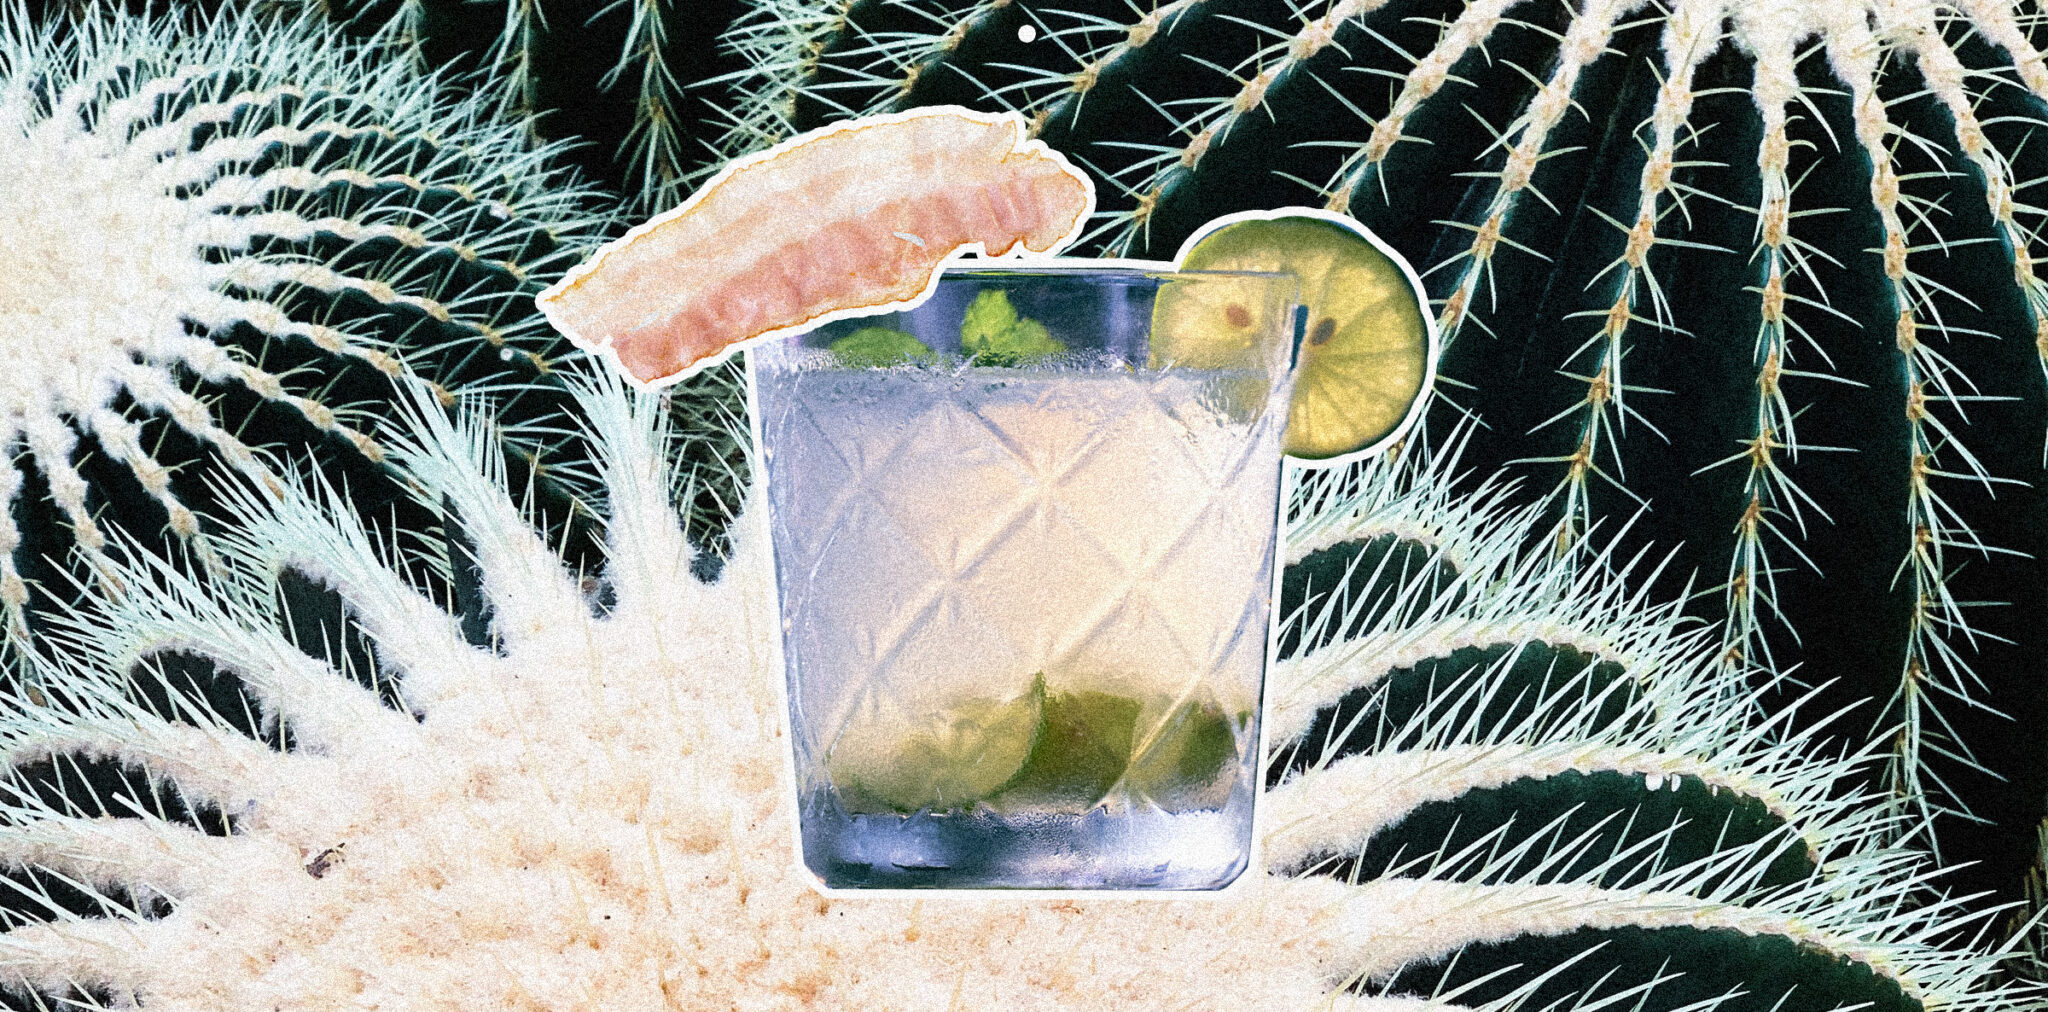 How to Properly Make a Deliciously Luxurious Bacon Margarita at Home